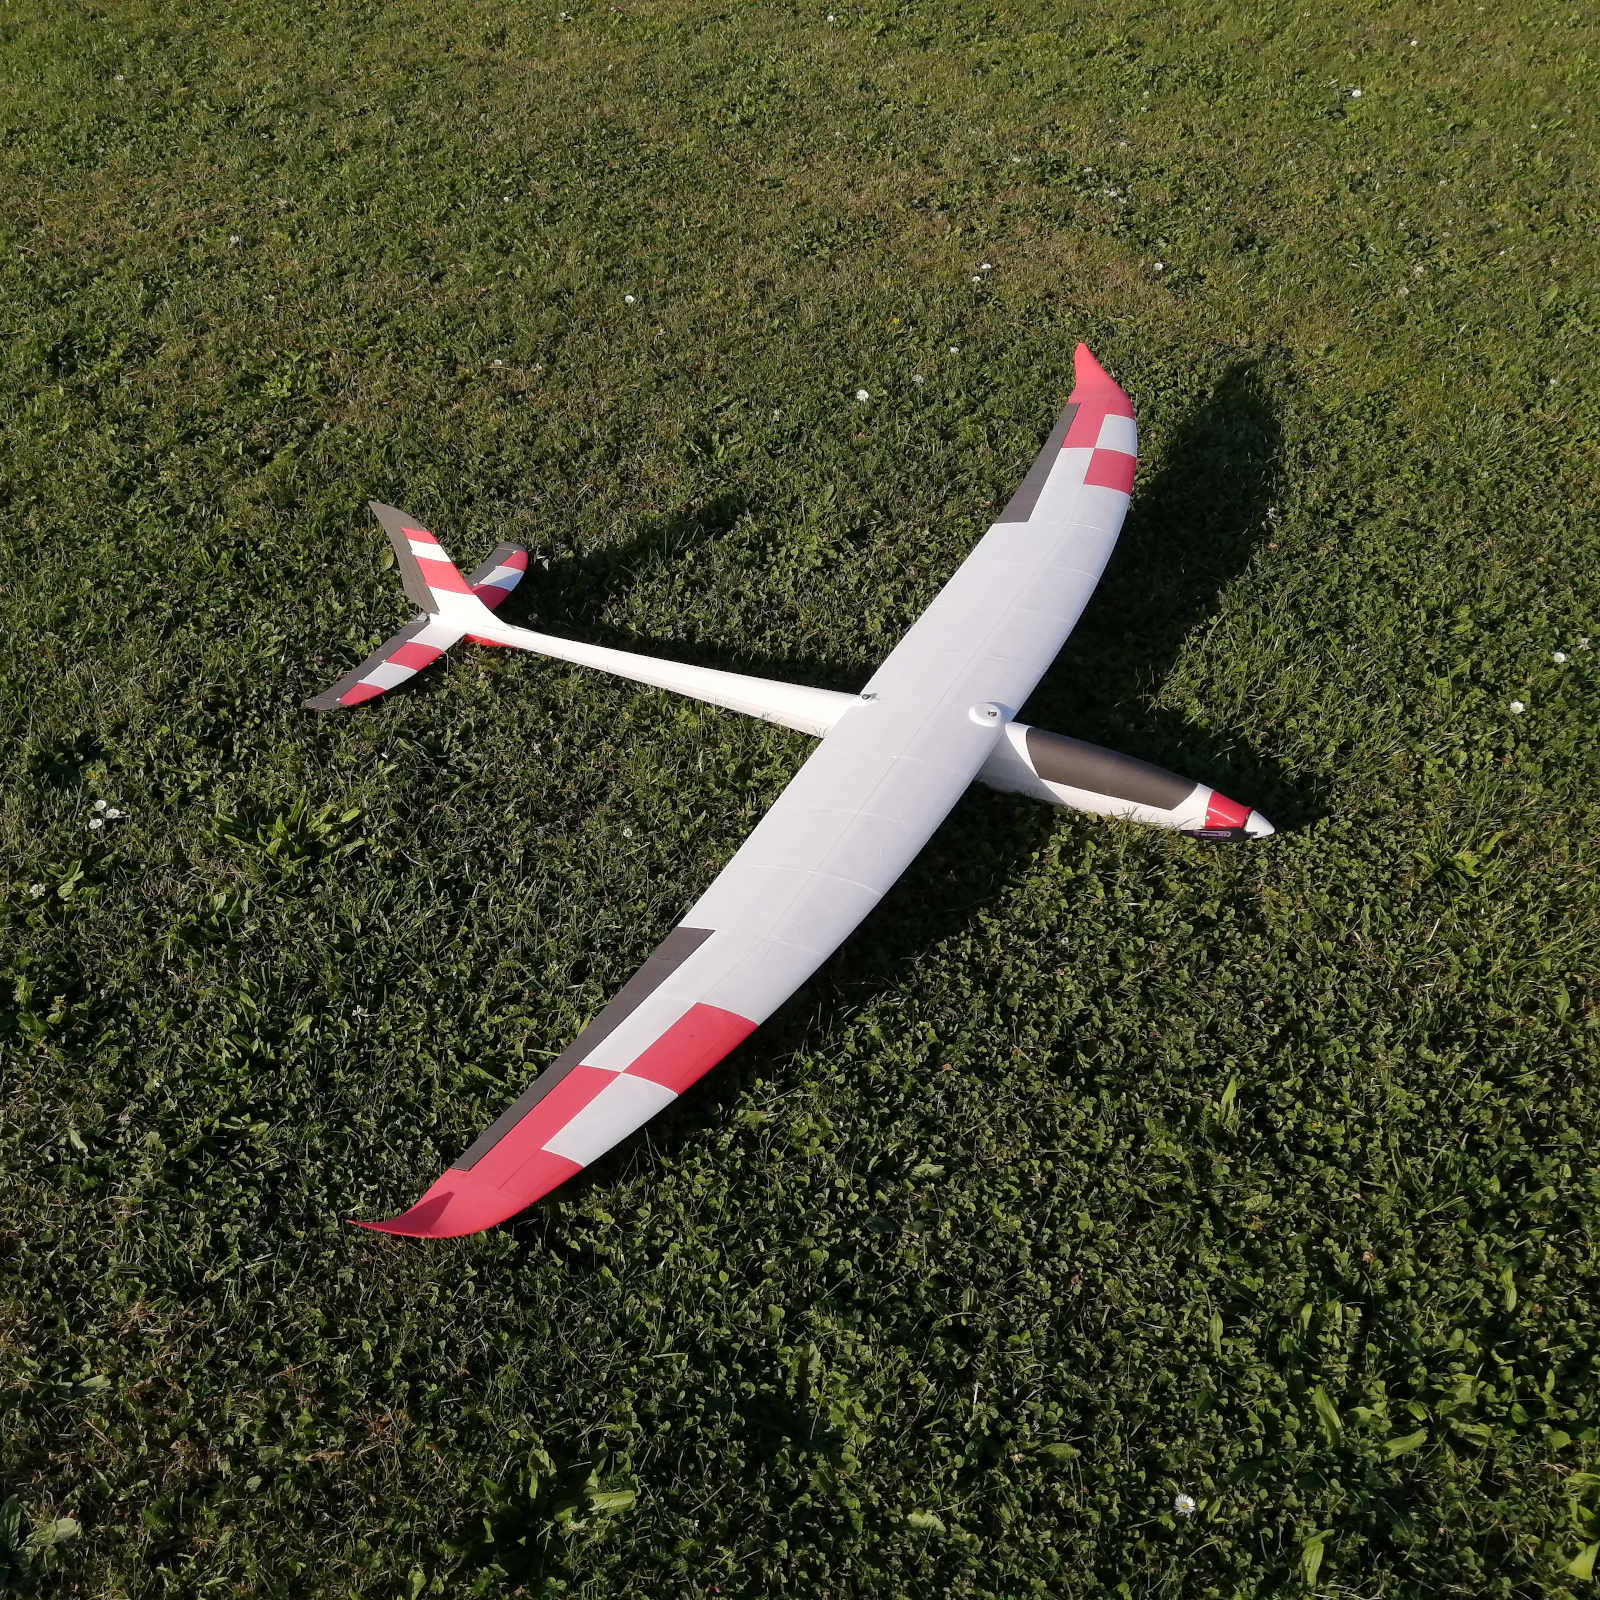 Lukisegler (electric RC glider) optional nose section reinforcement